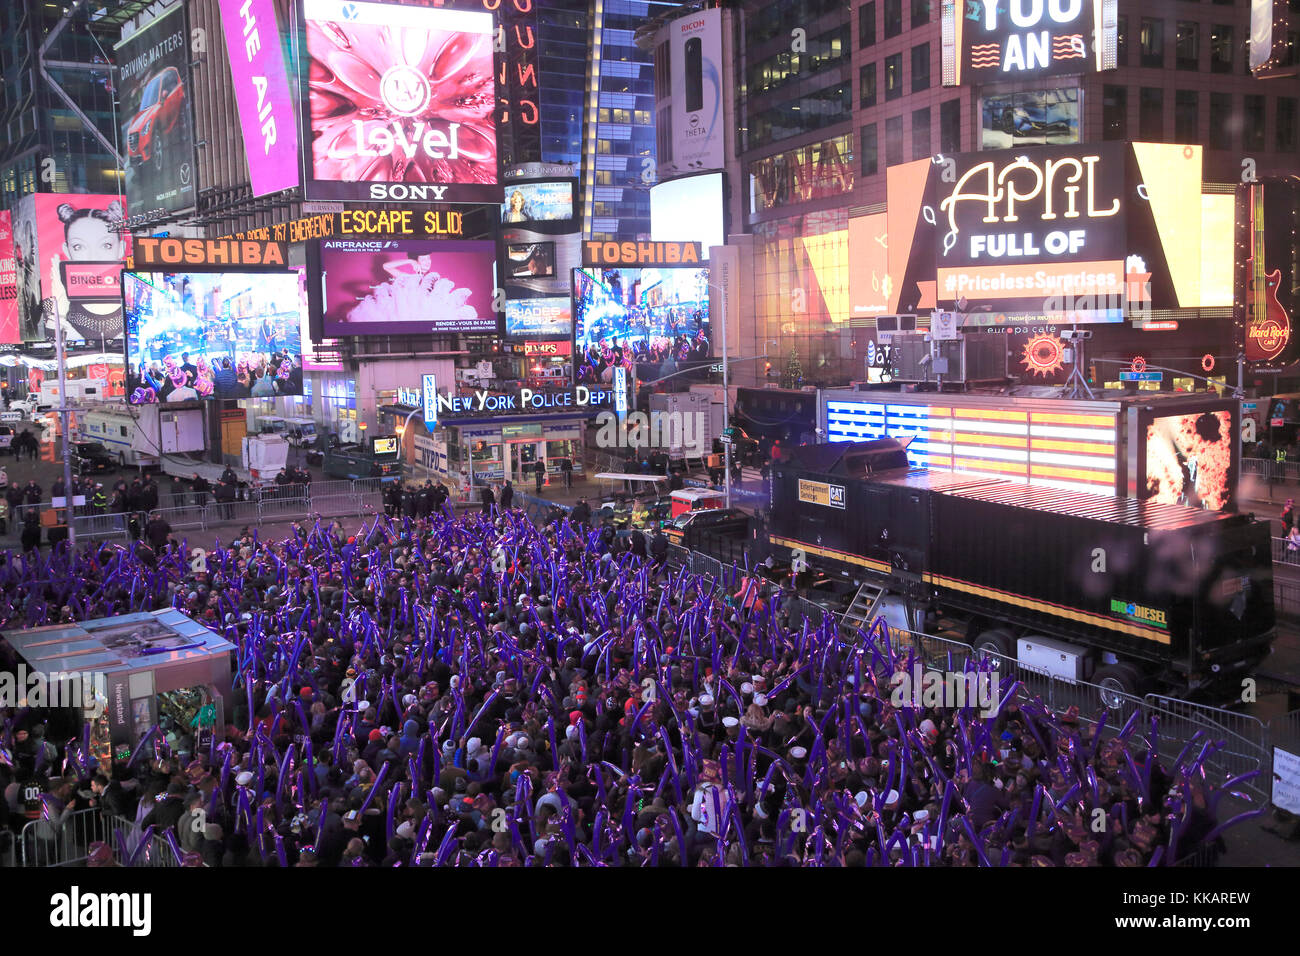 Crowds of revellers on New Years Eve, Times Square, Manhattan, New York City, New York, United States of America, North America Stock Photo